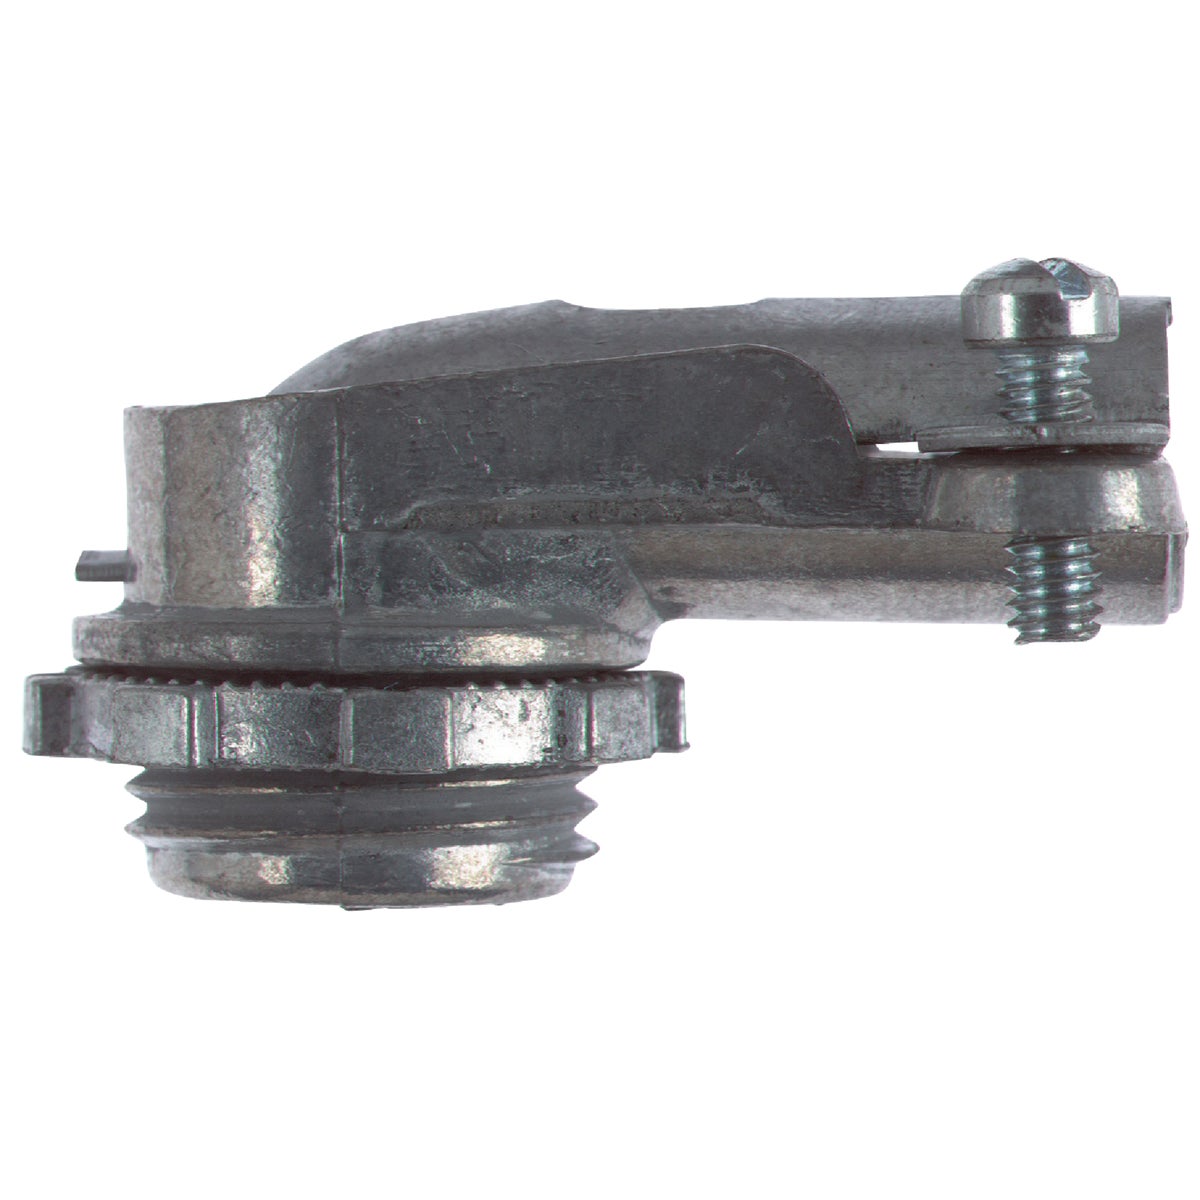 Halex 3/8 In. Clamp 90 Degree Armored Cable/Conduit Connector